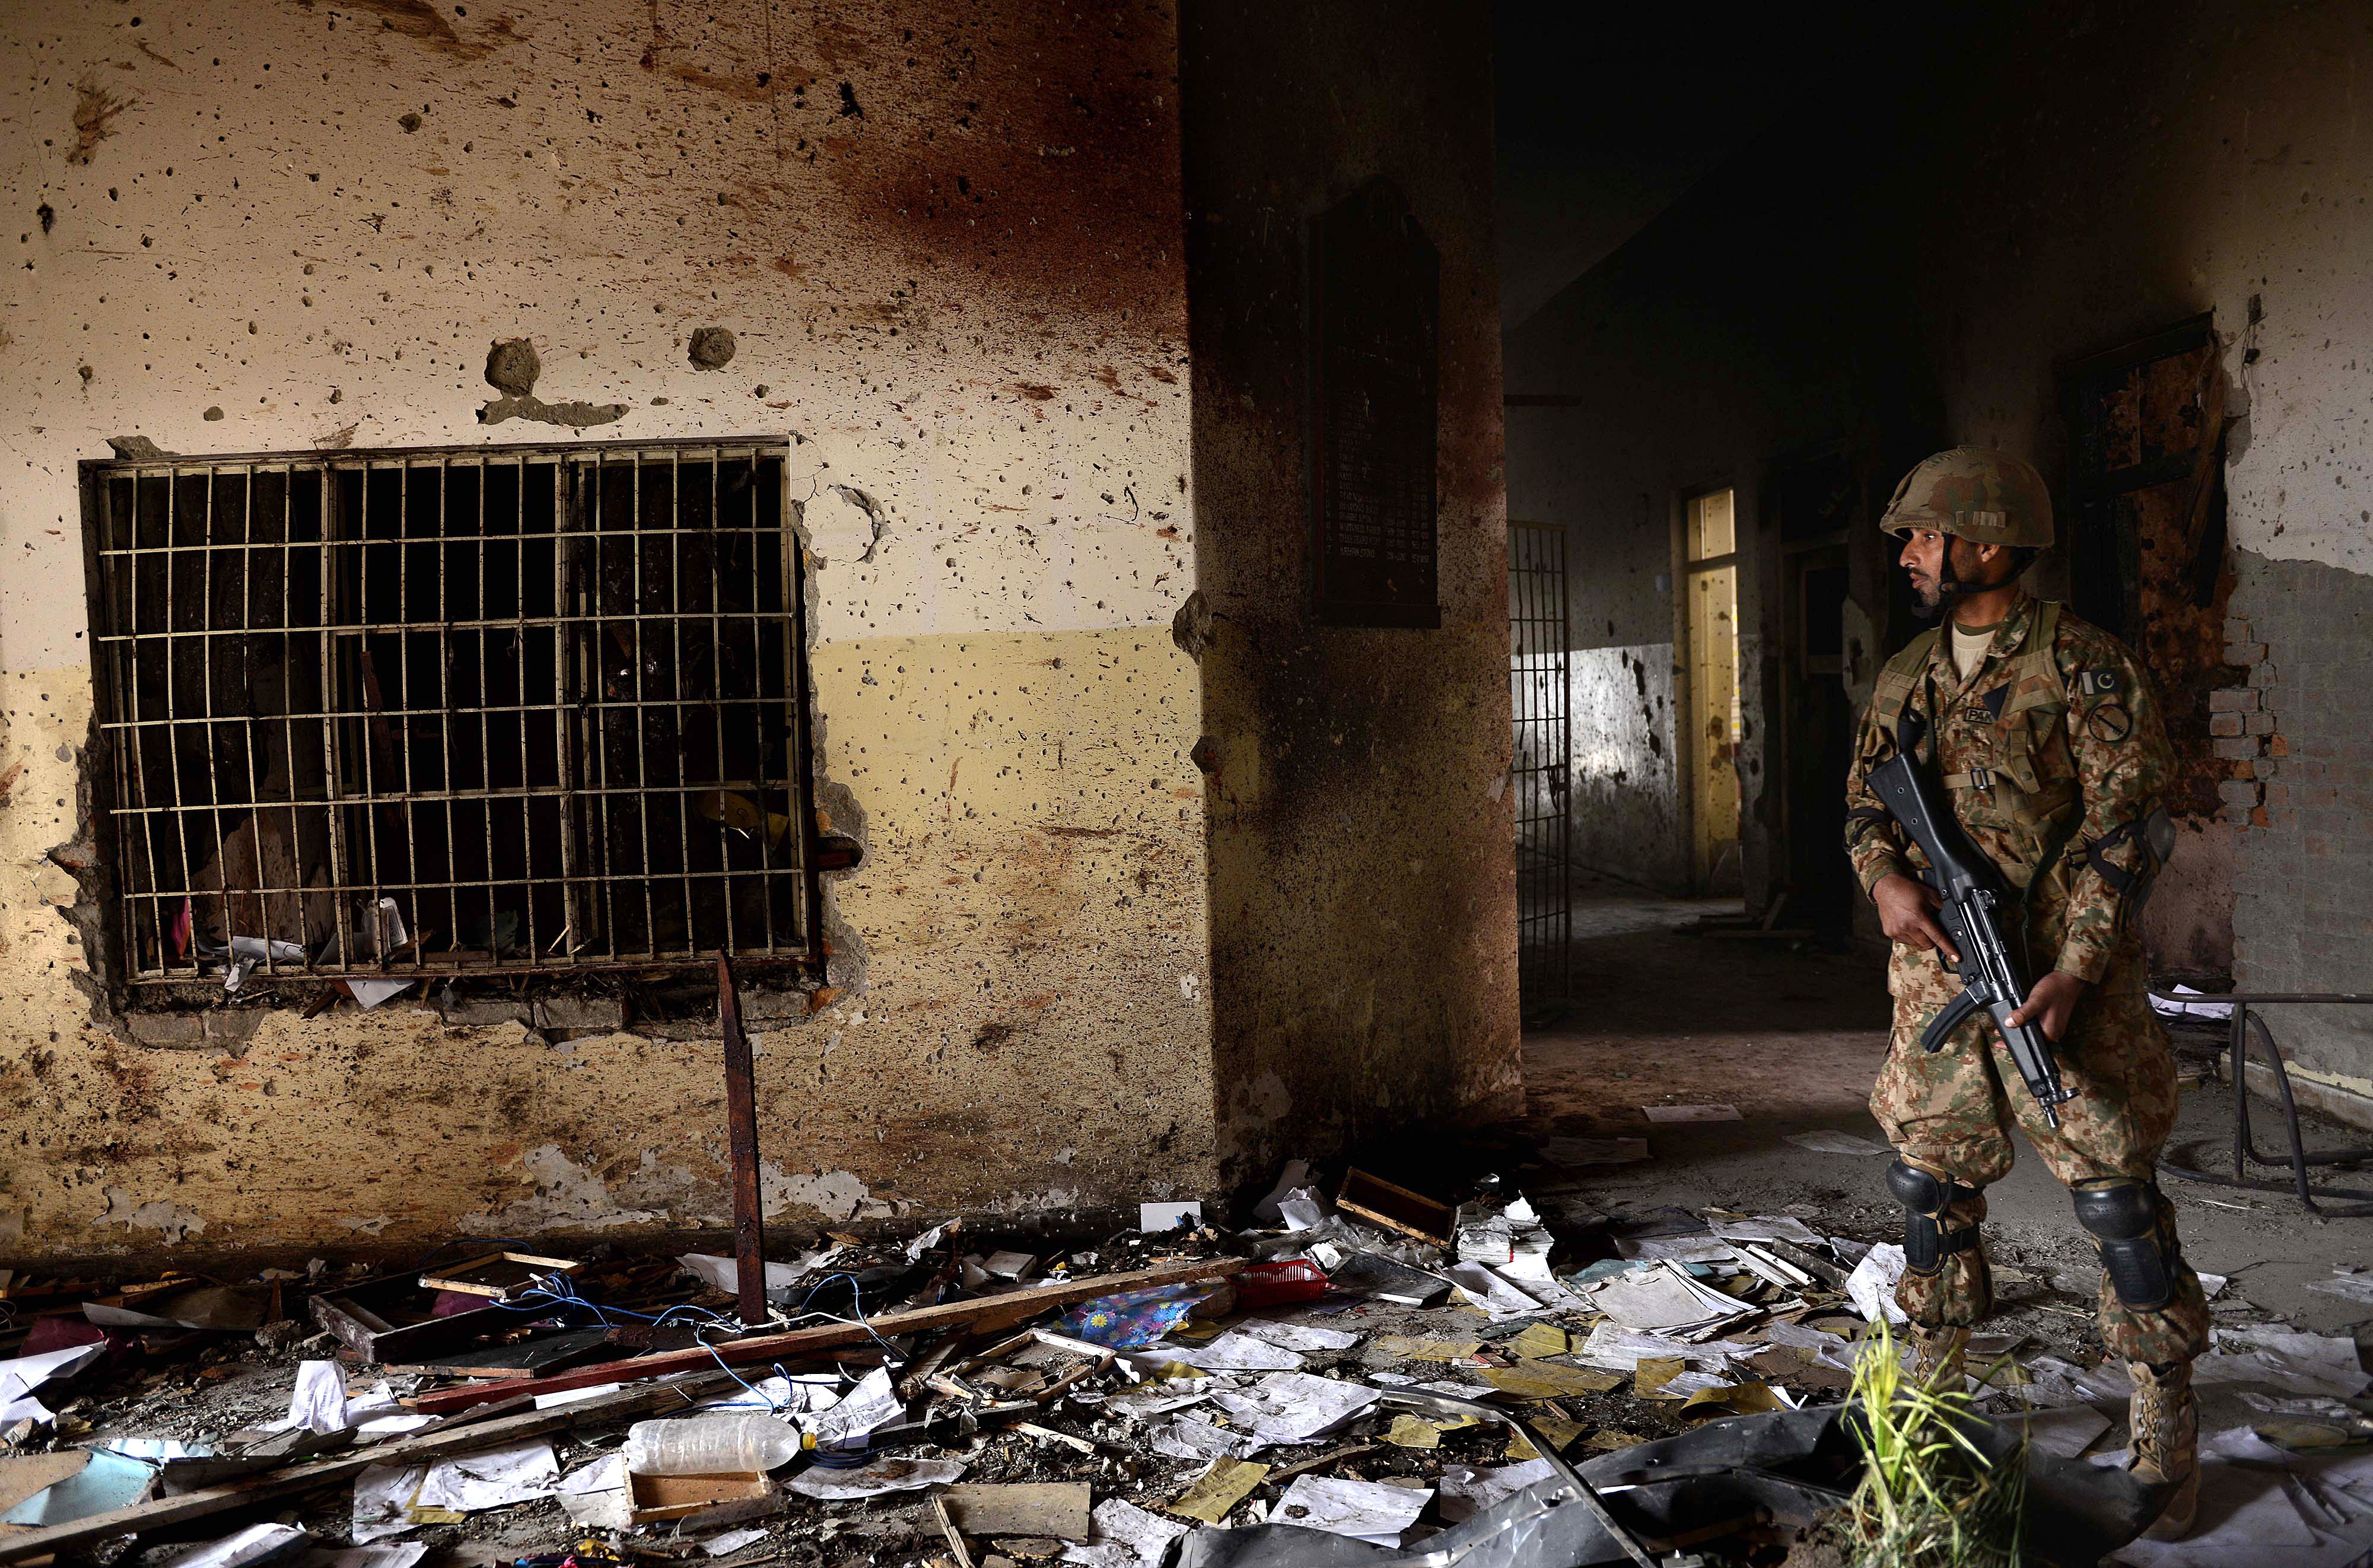 A Pakistani army soldier stands guard at the site of the militants' attack on the army-run school in Peshawar on December 18, 2014. (A MAJEED—AFP/Getty Images)